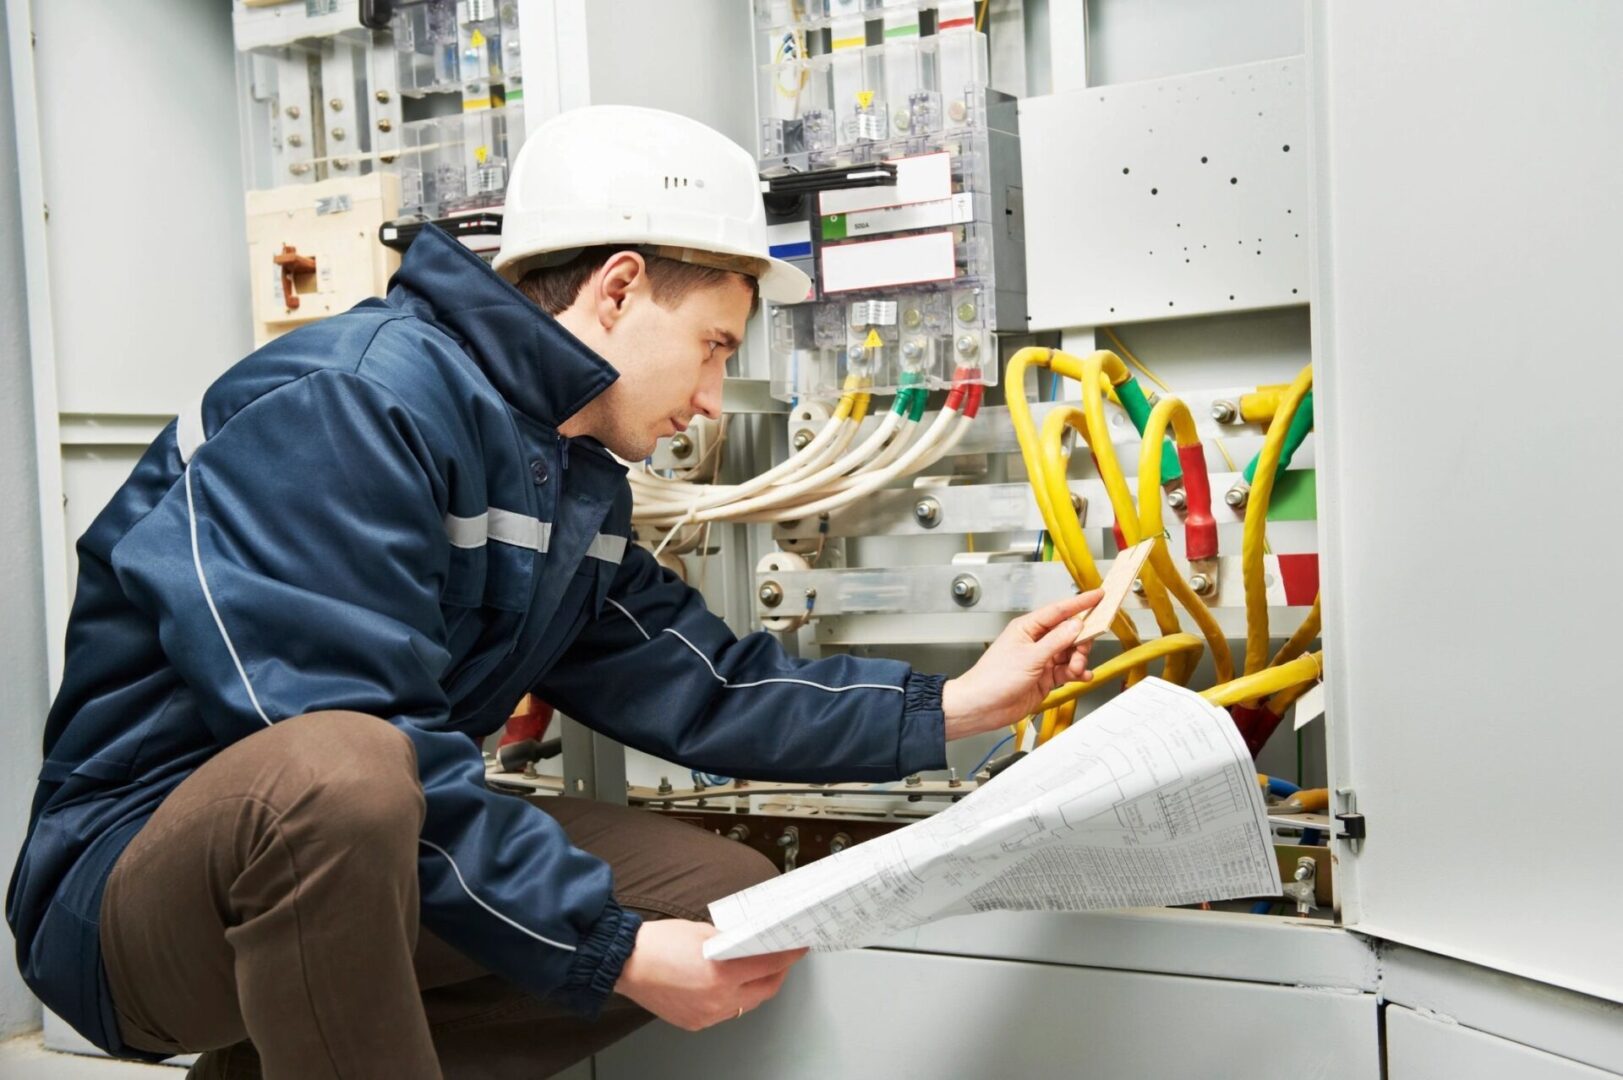 Electrician examining a schematic while working on an industrial power control panel.